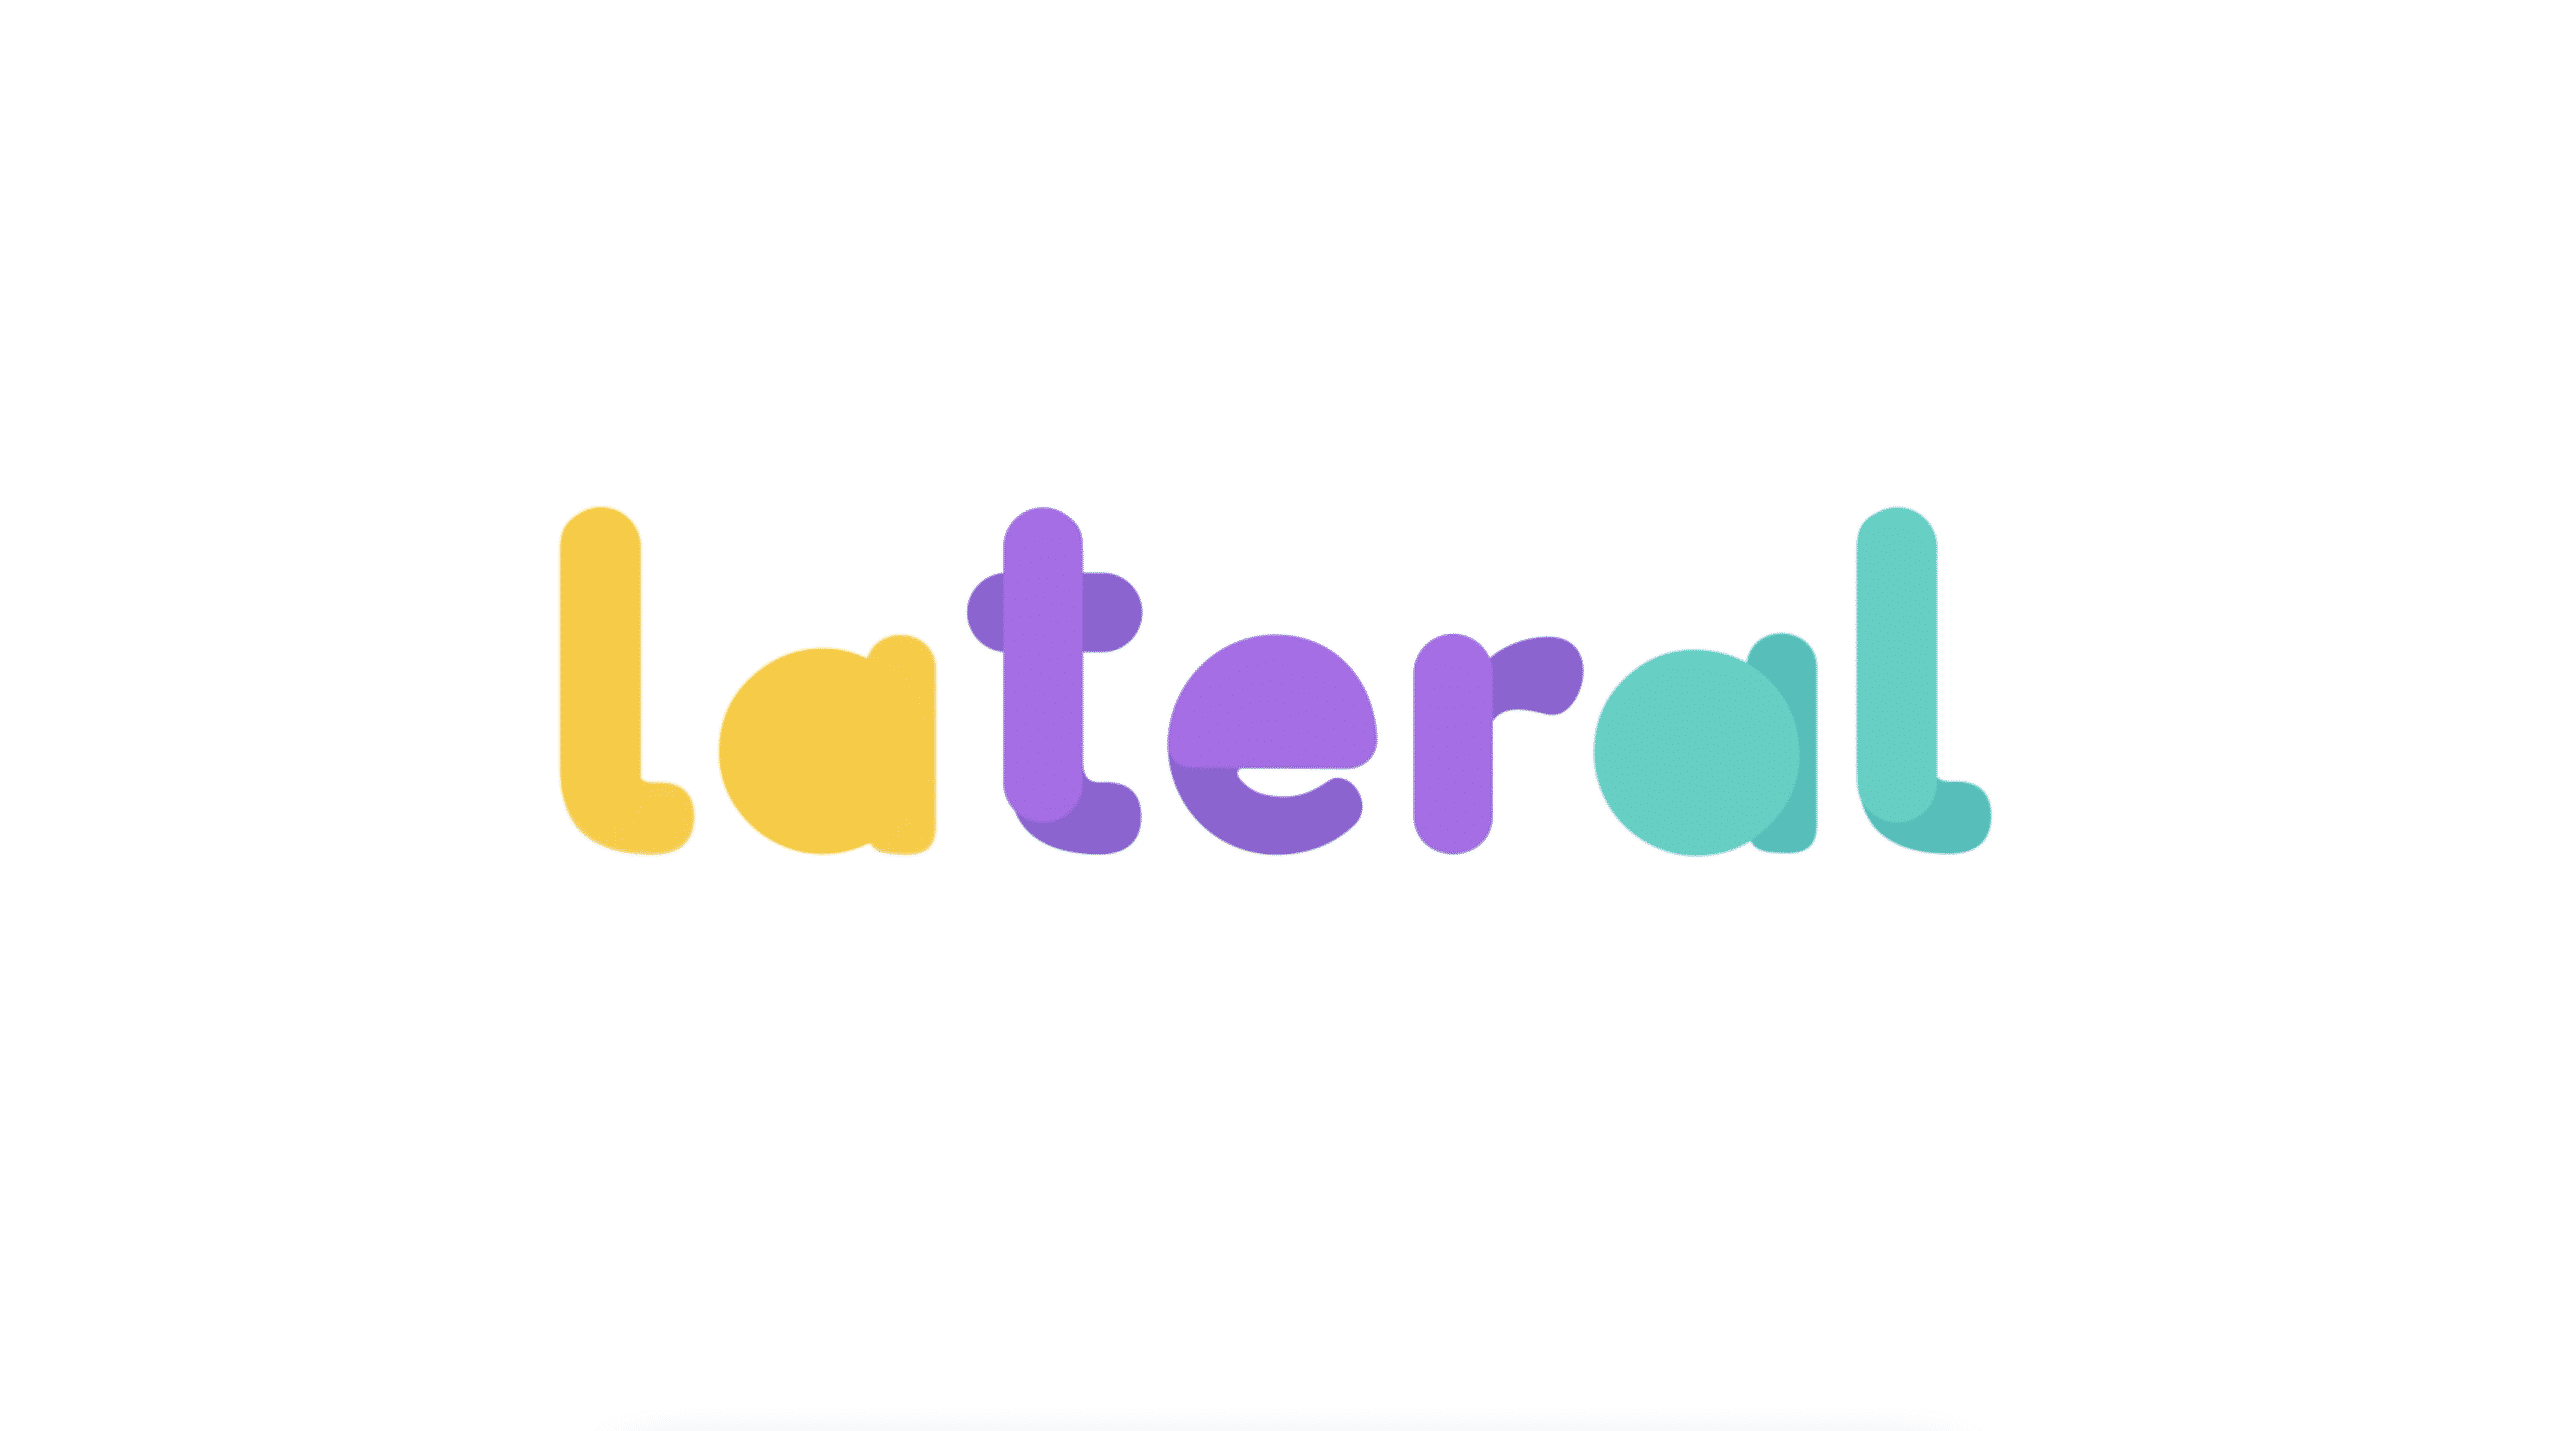 (c) Lateral-lab.it